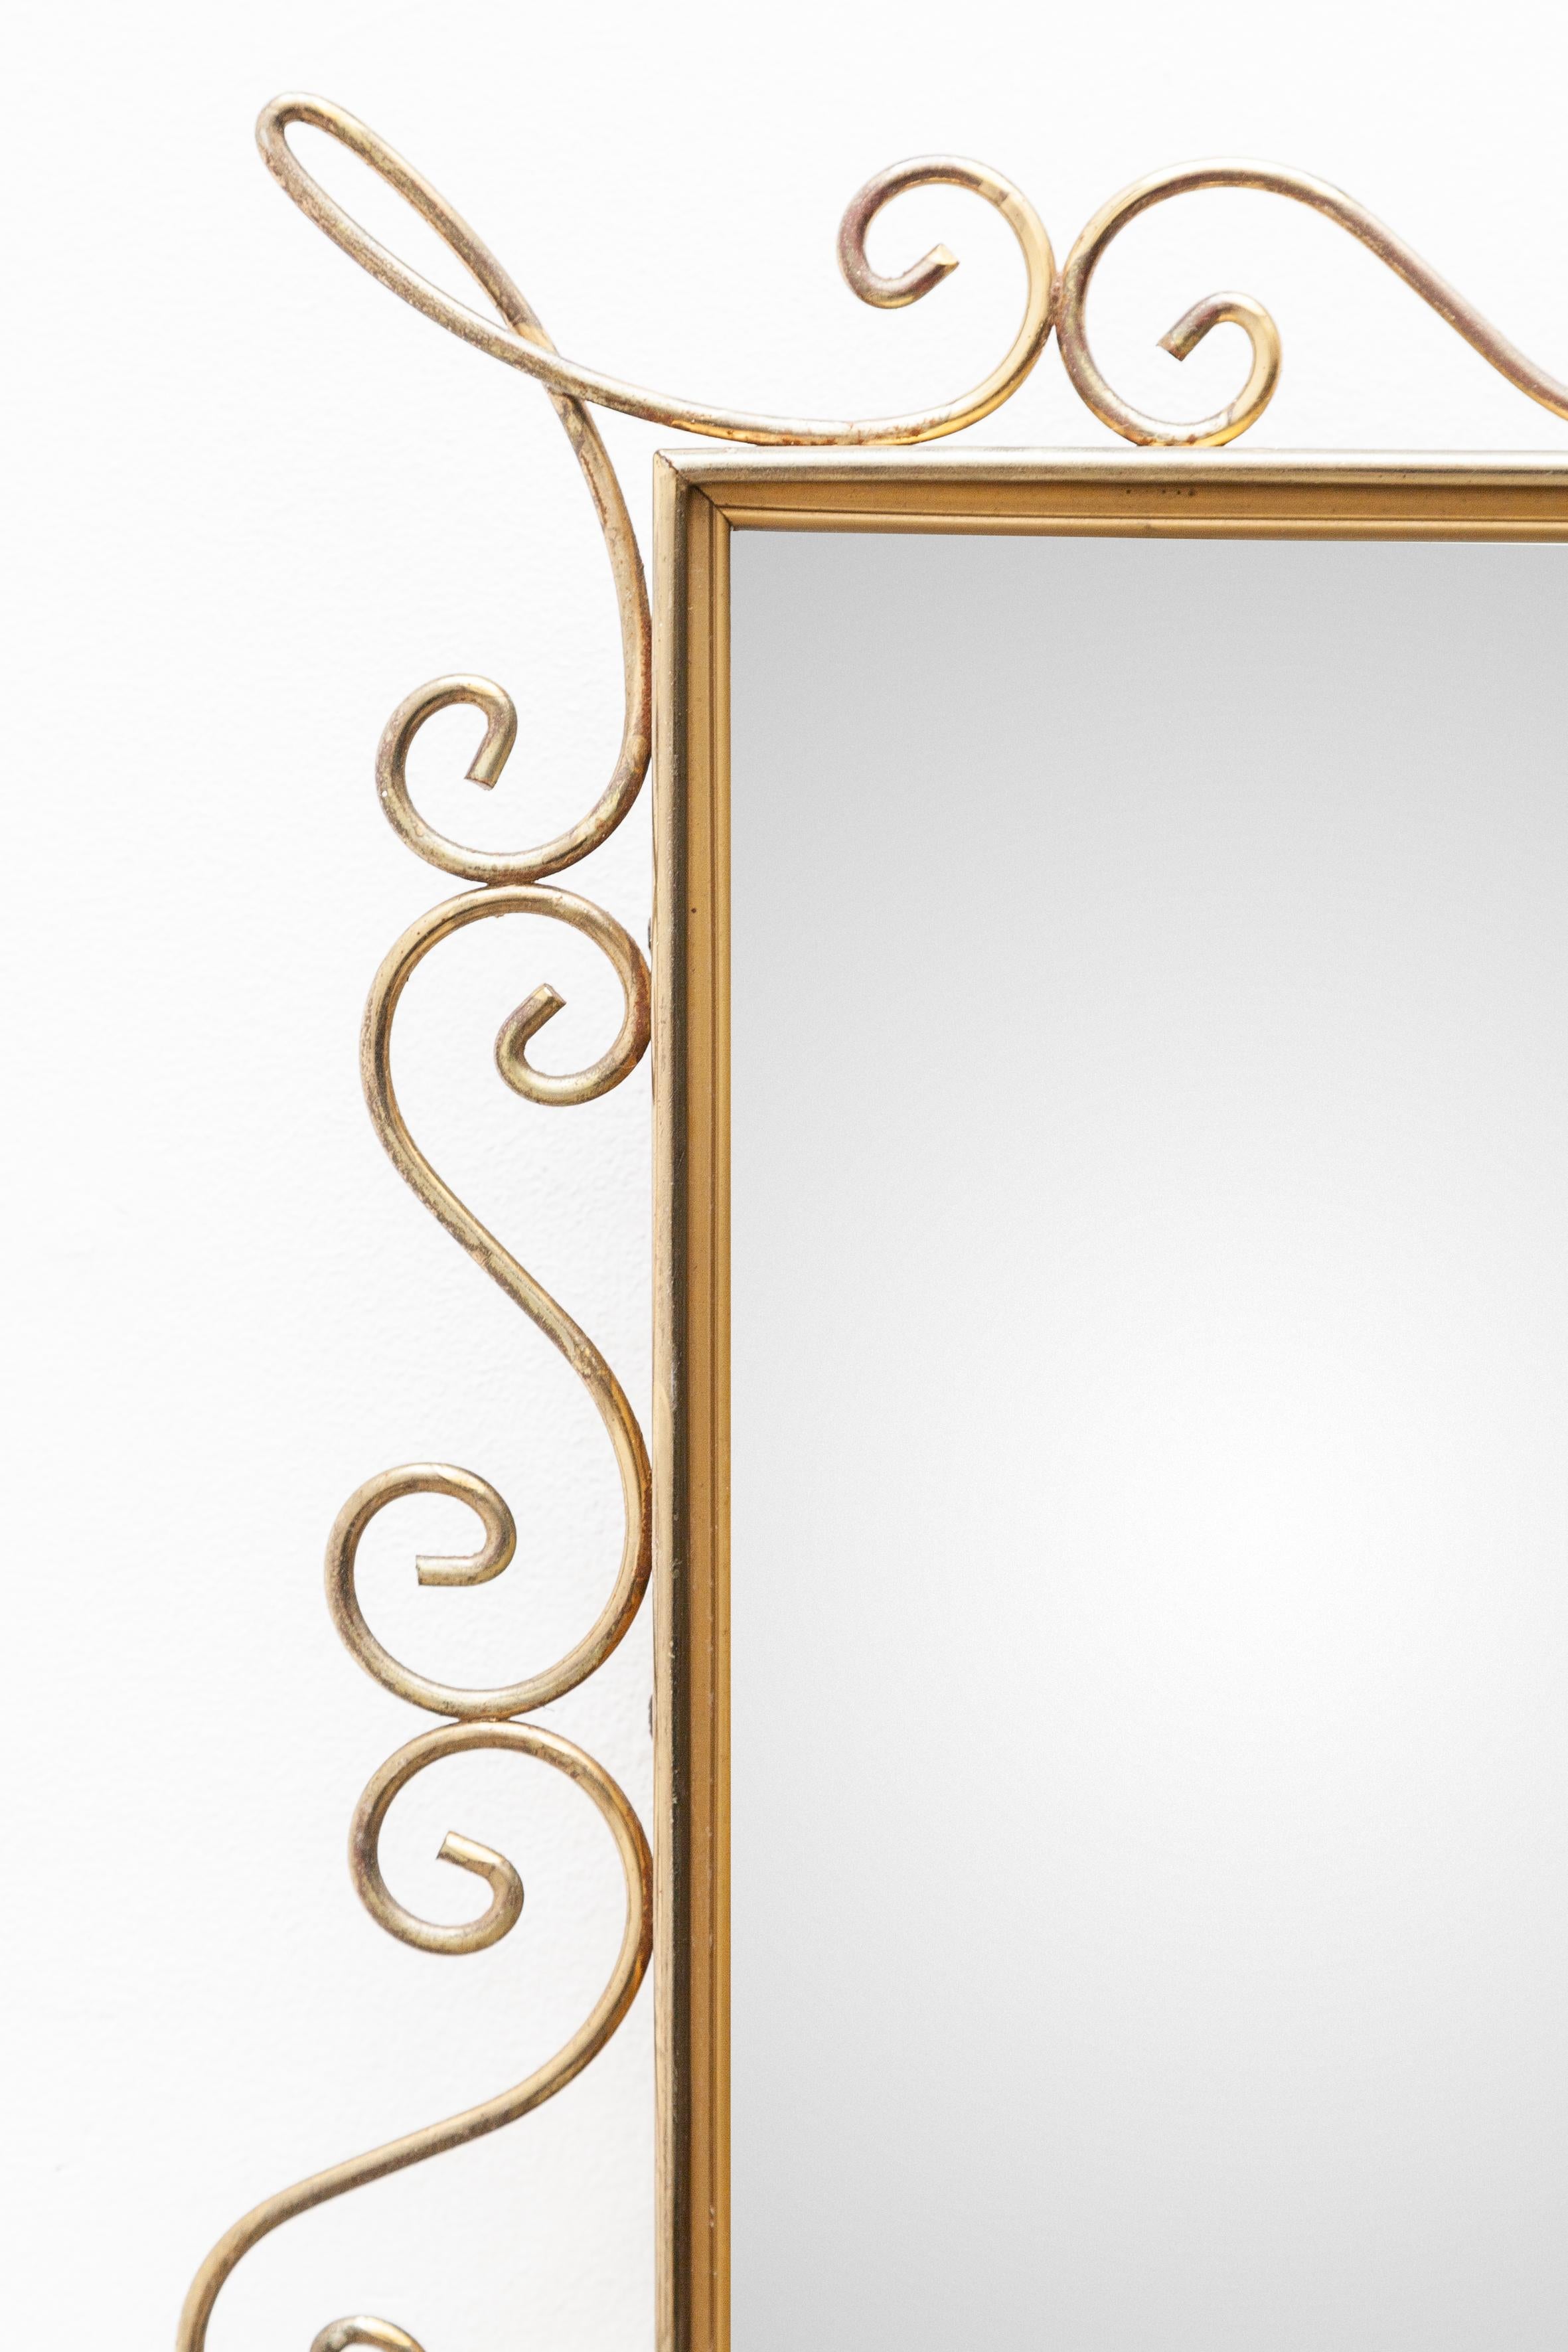 Italian Brass Wired Sculptural Loop Wall Mirror, 1950s For Sale 2